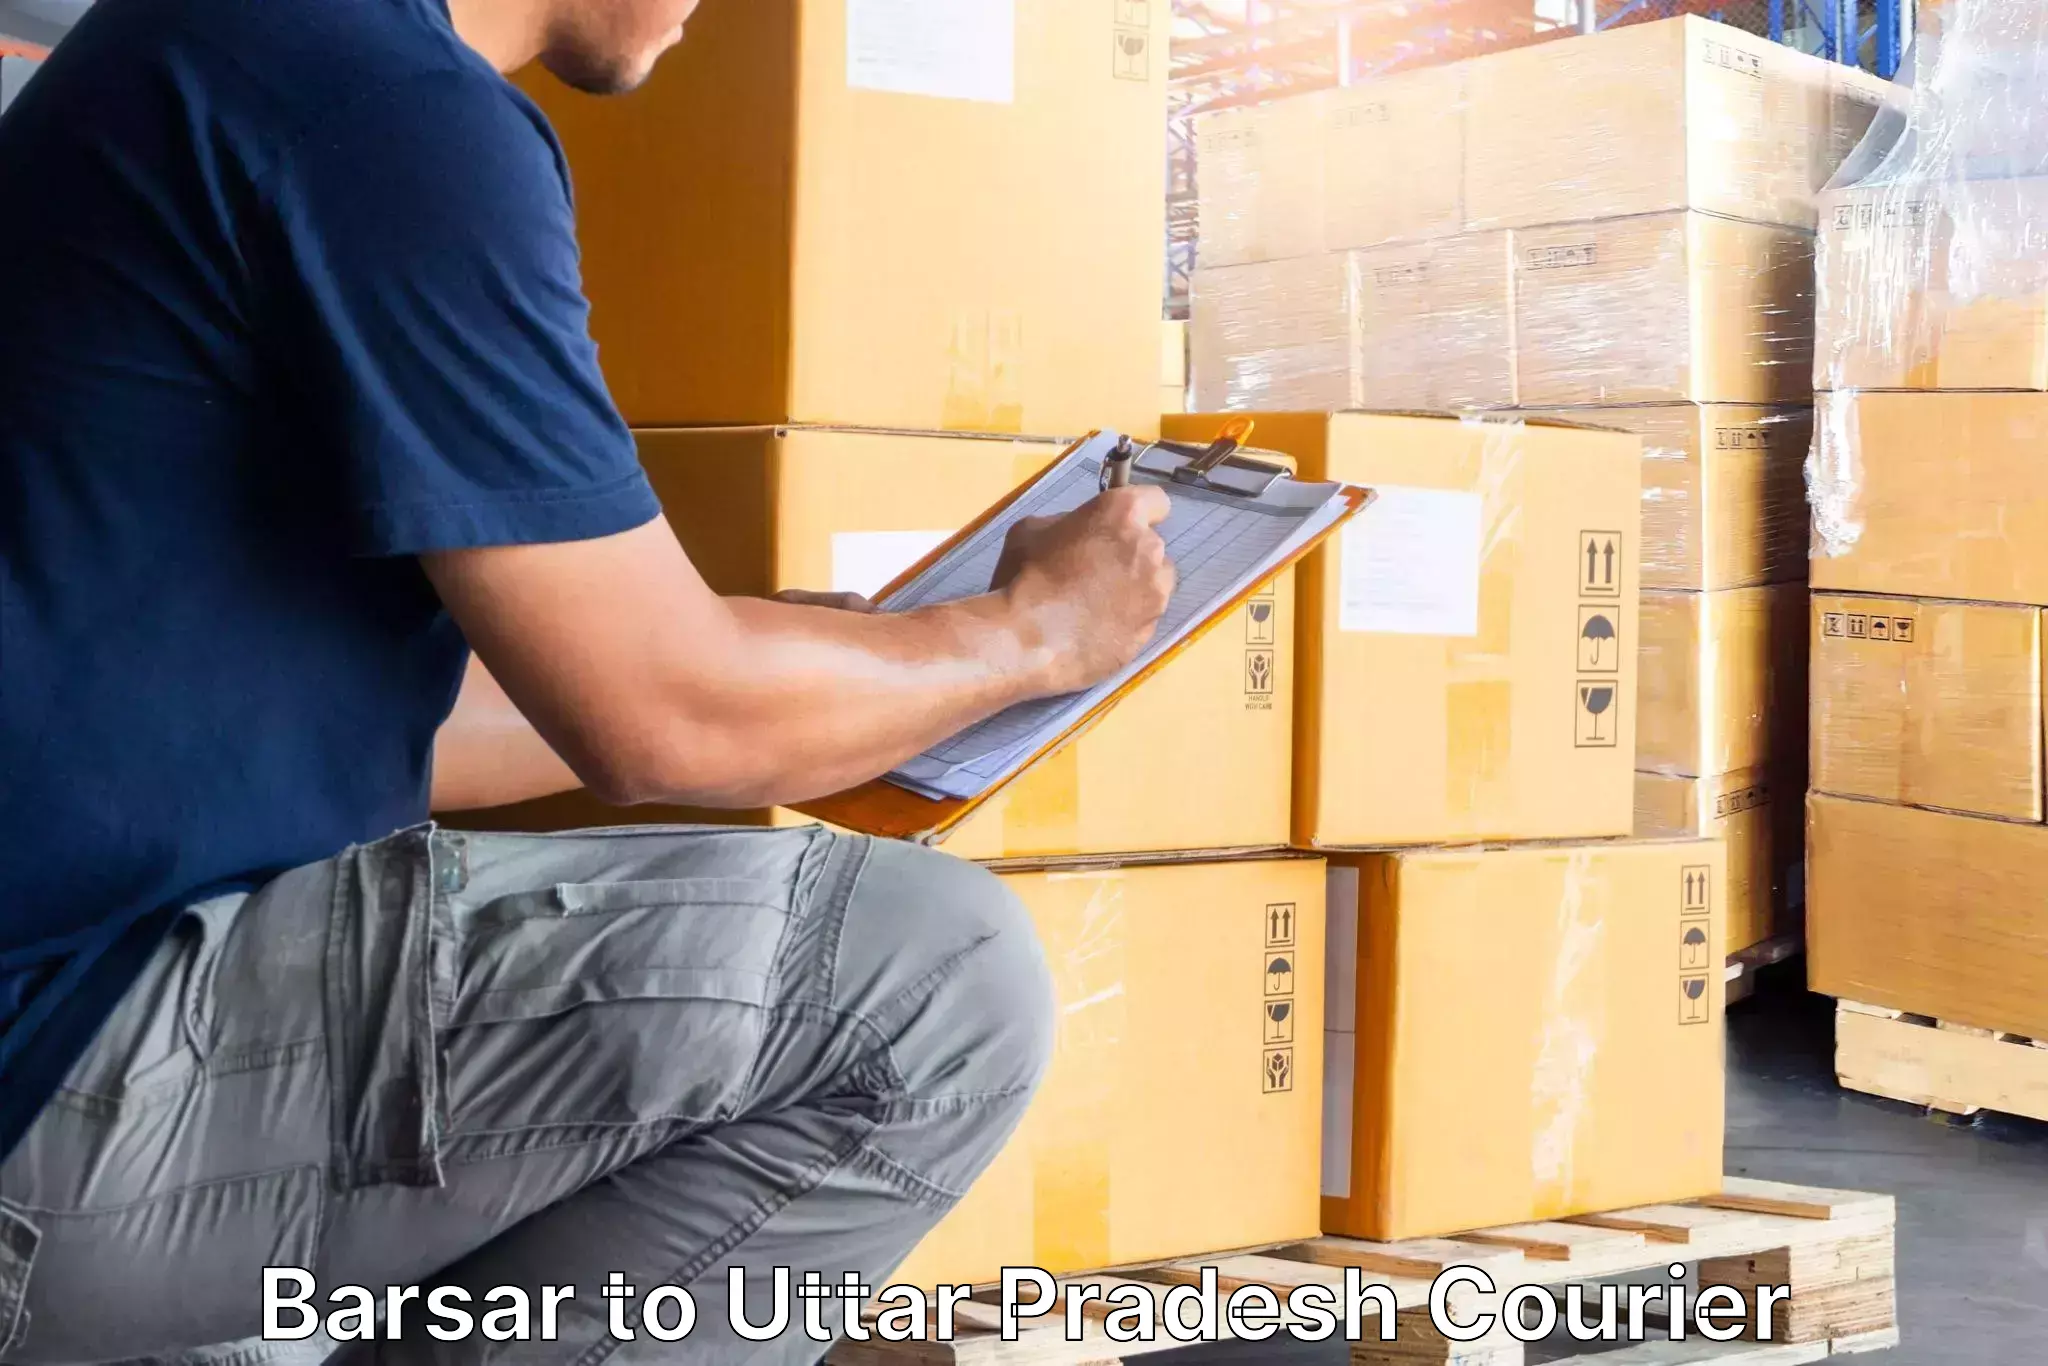 High-quality moving services in Barsar to Aligarh